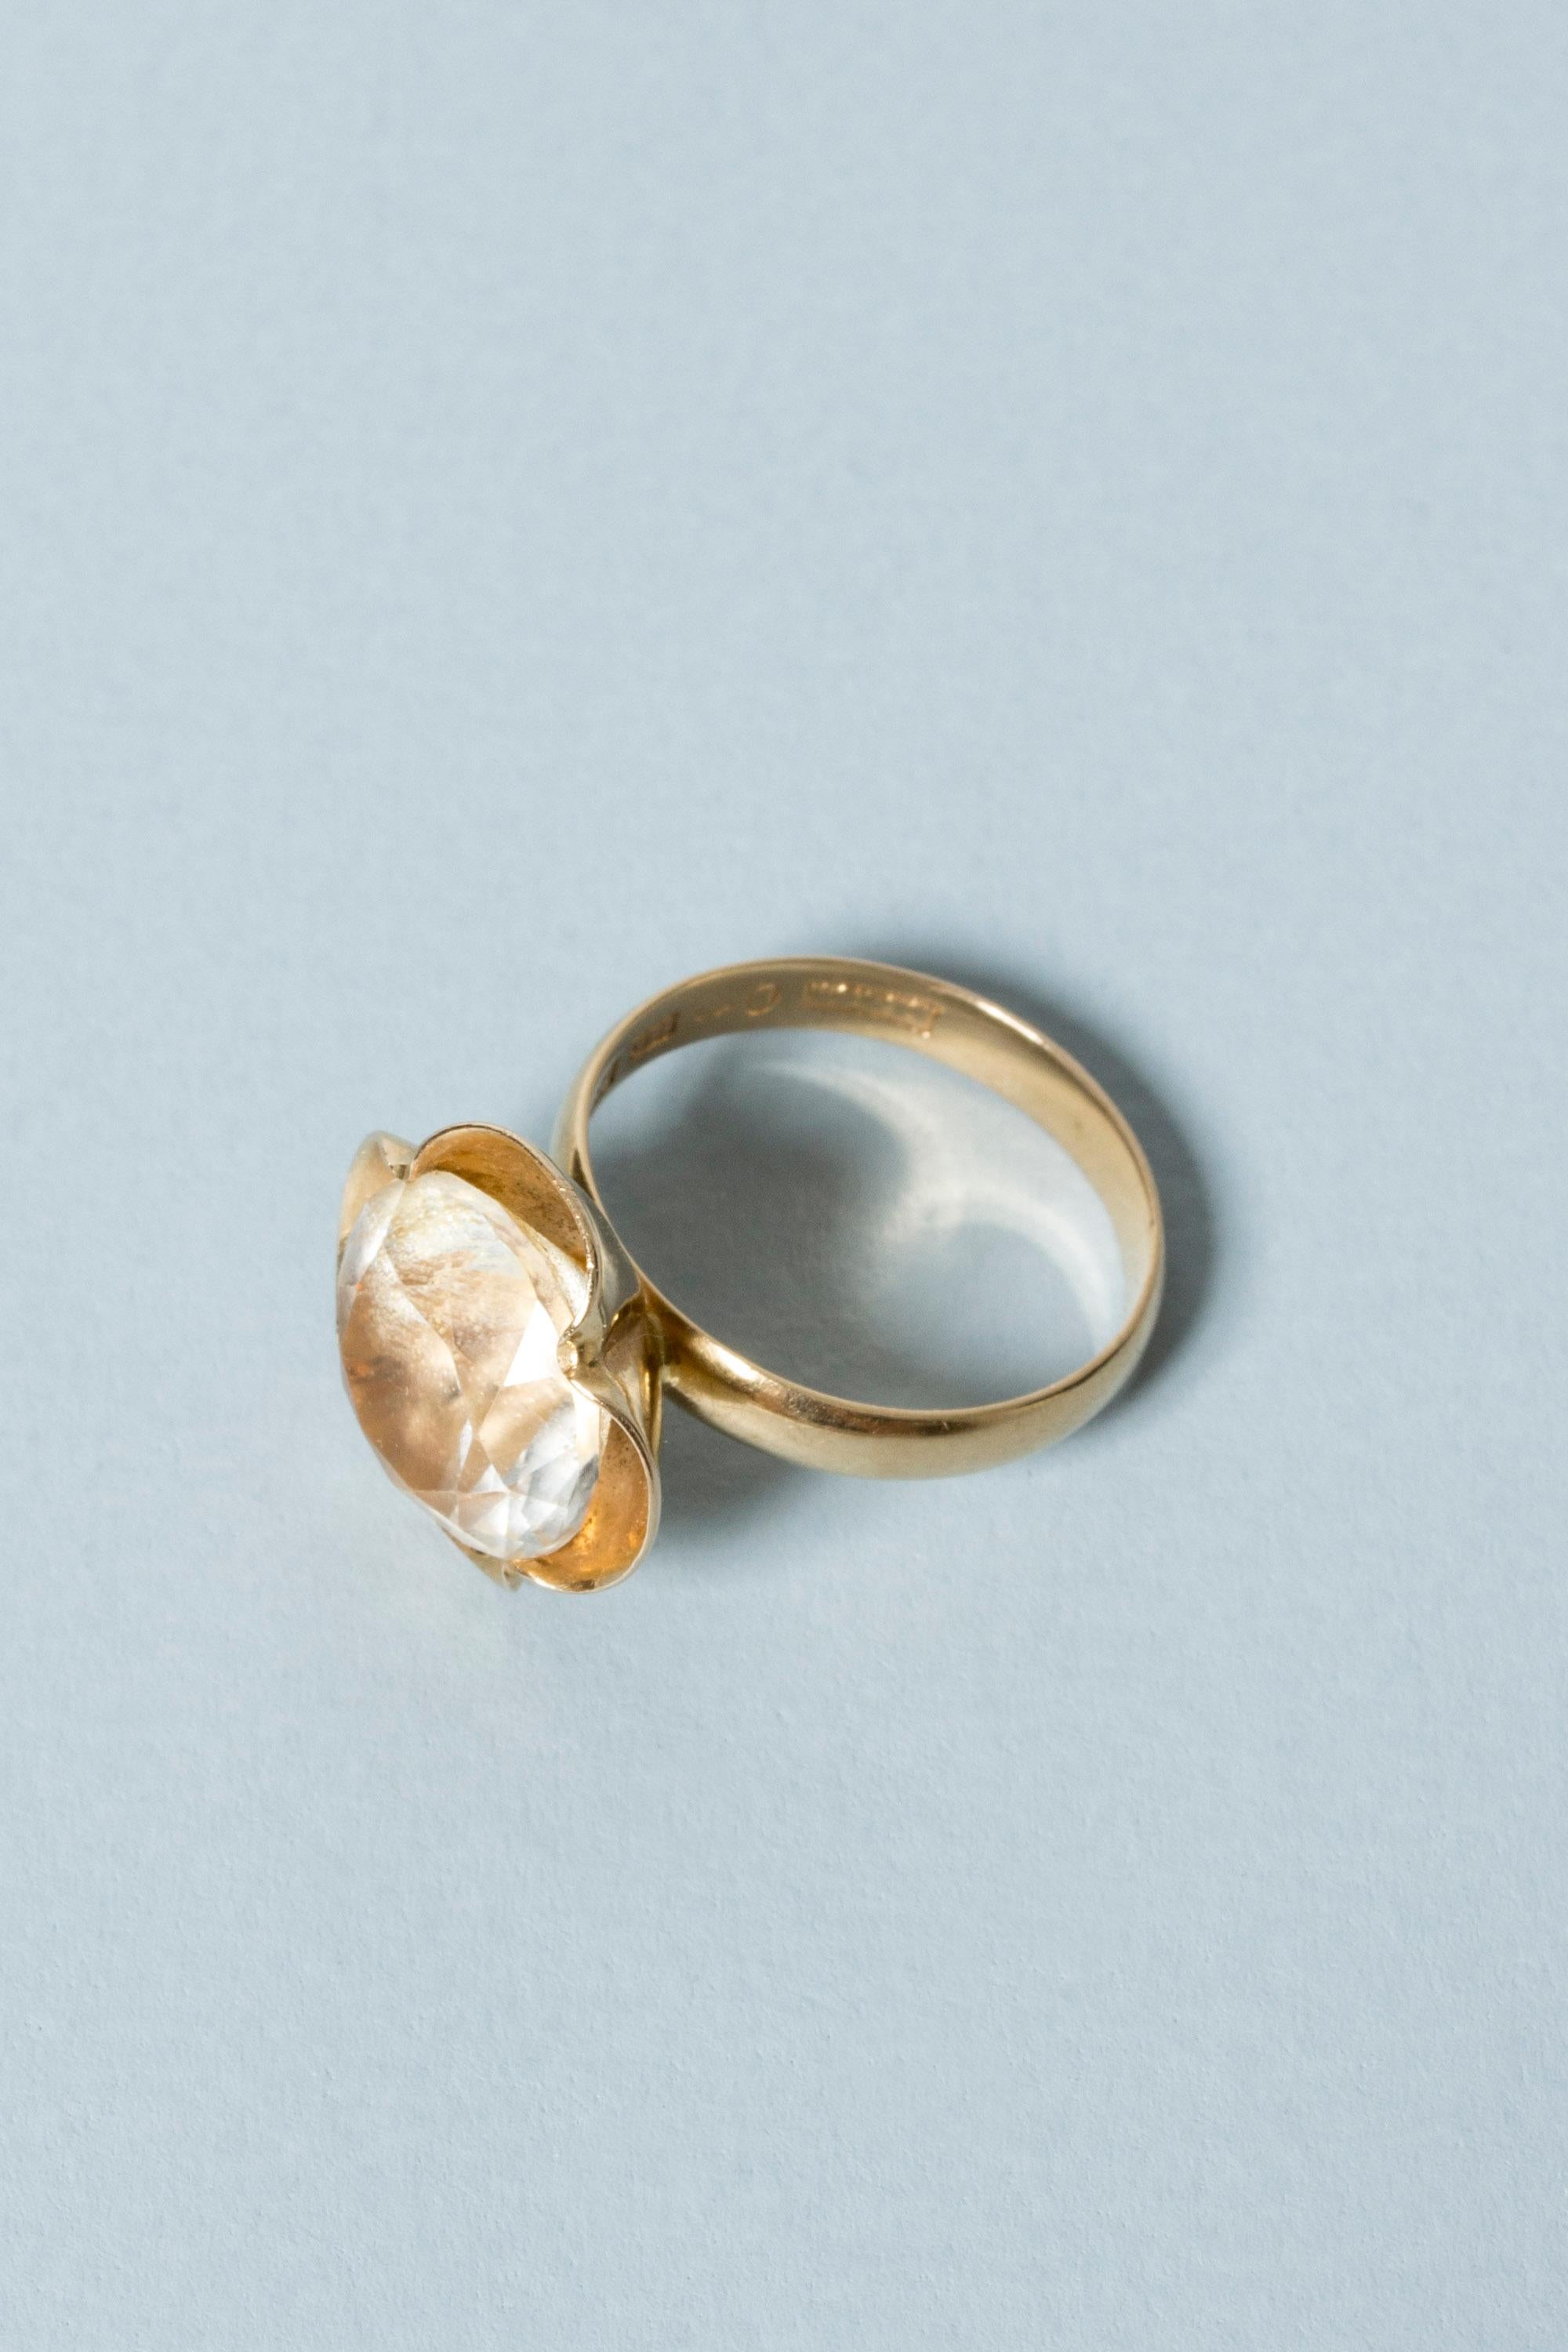 Gold ring in a sweet, modernist design from Alton. Crisp, stylized flower petals enclose a rock crystal stone. 